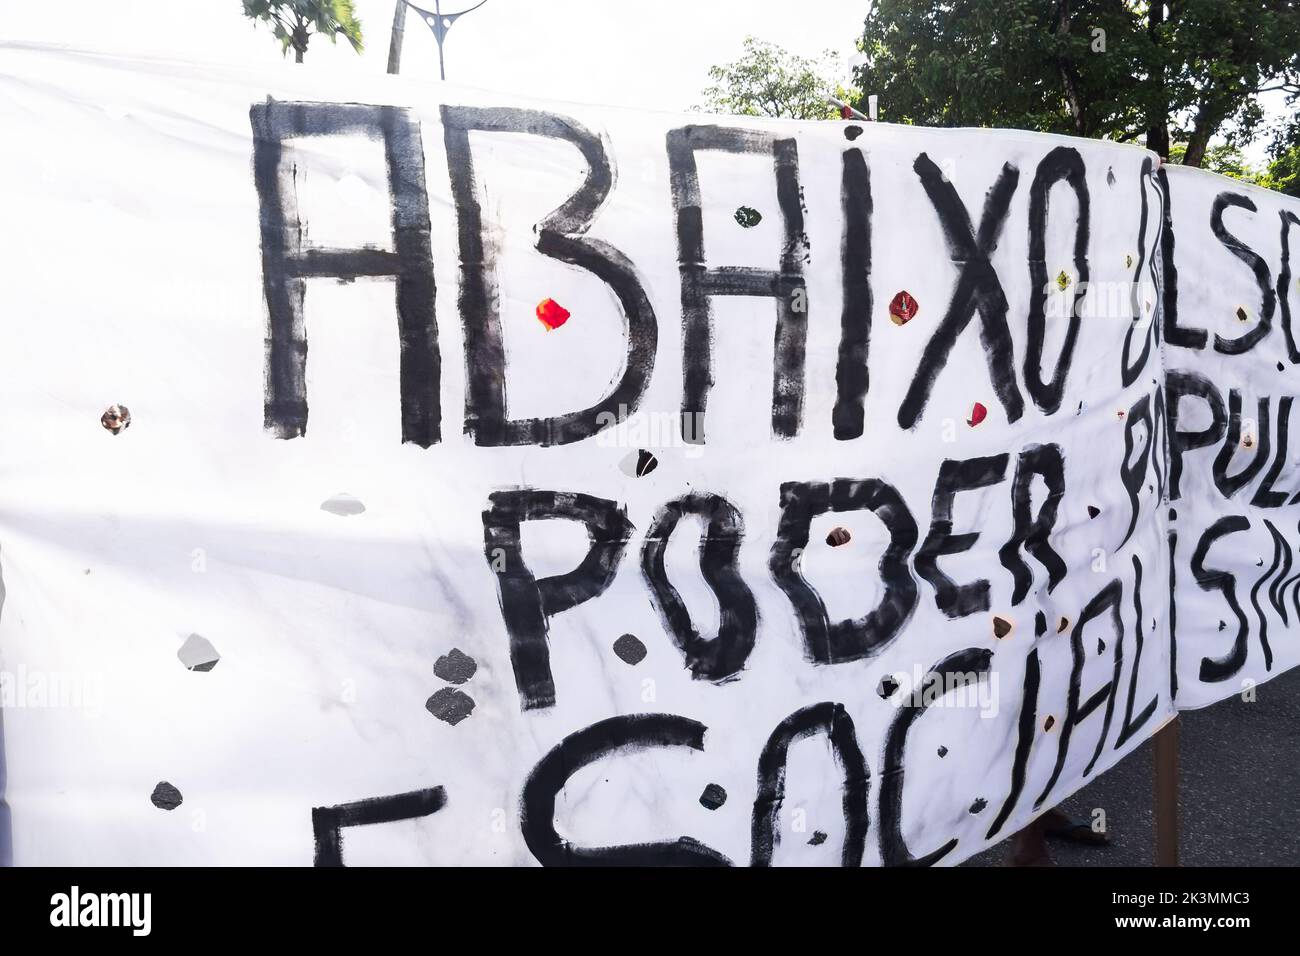 Salvador, Bahia, Brazil - November 20, 2021: Brazilians protest with banners and posters with words against the government of President Jair Bolsonaro Stock Photo